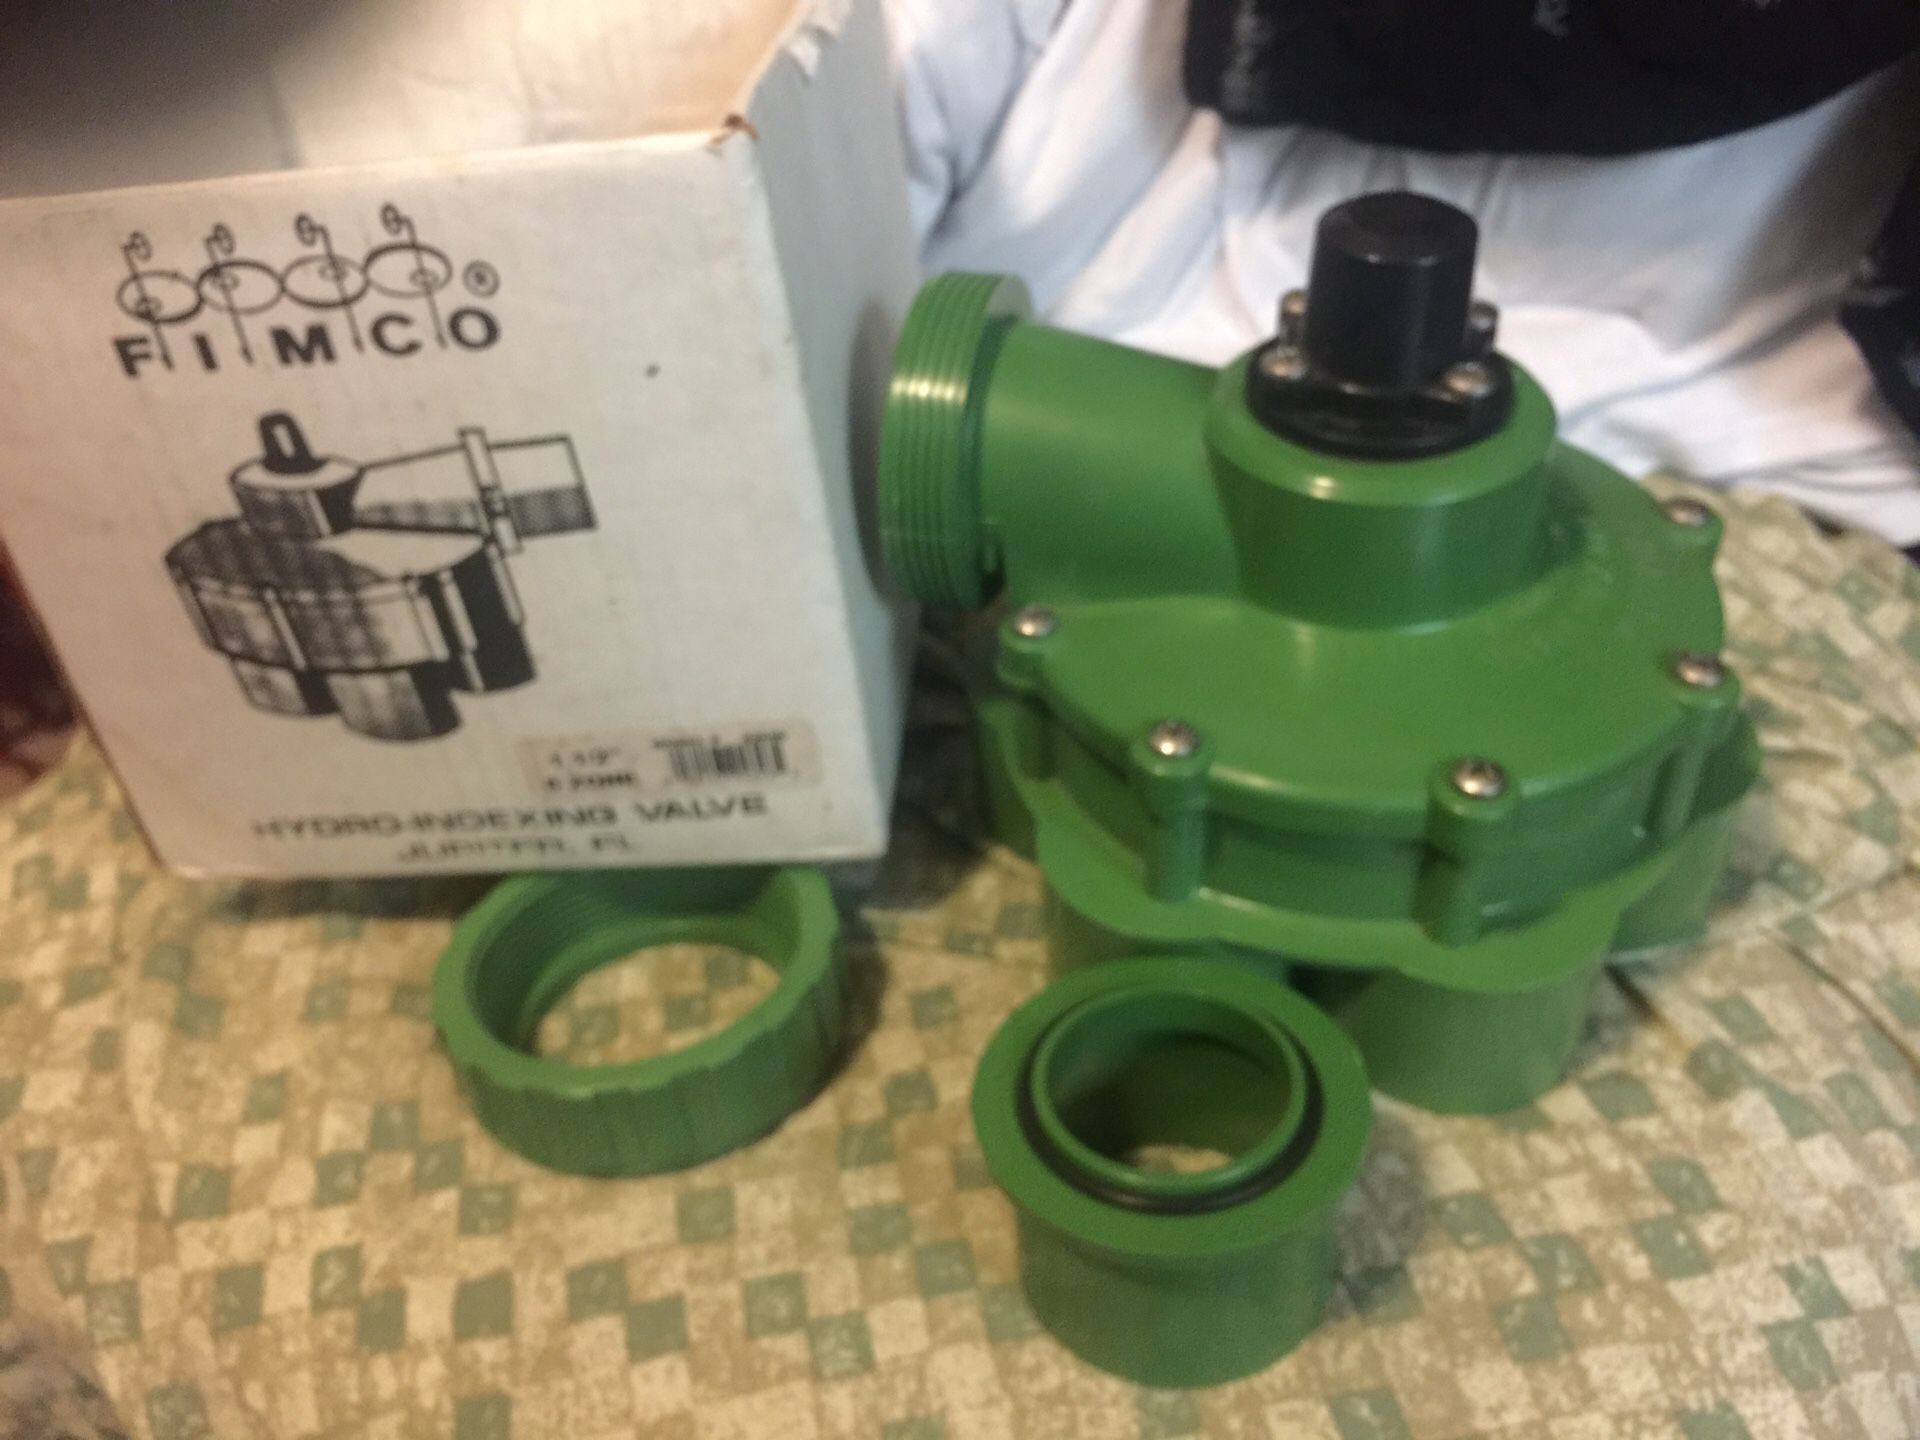 Fimco 1 1/2” 6zone Hydro indexing valve model#92696 for sprinkler system great deal.